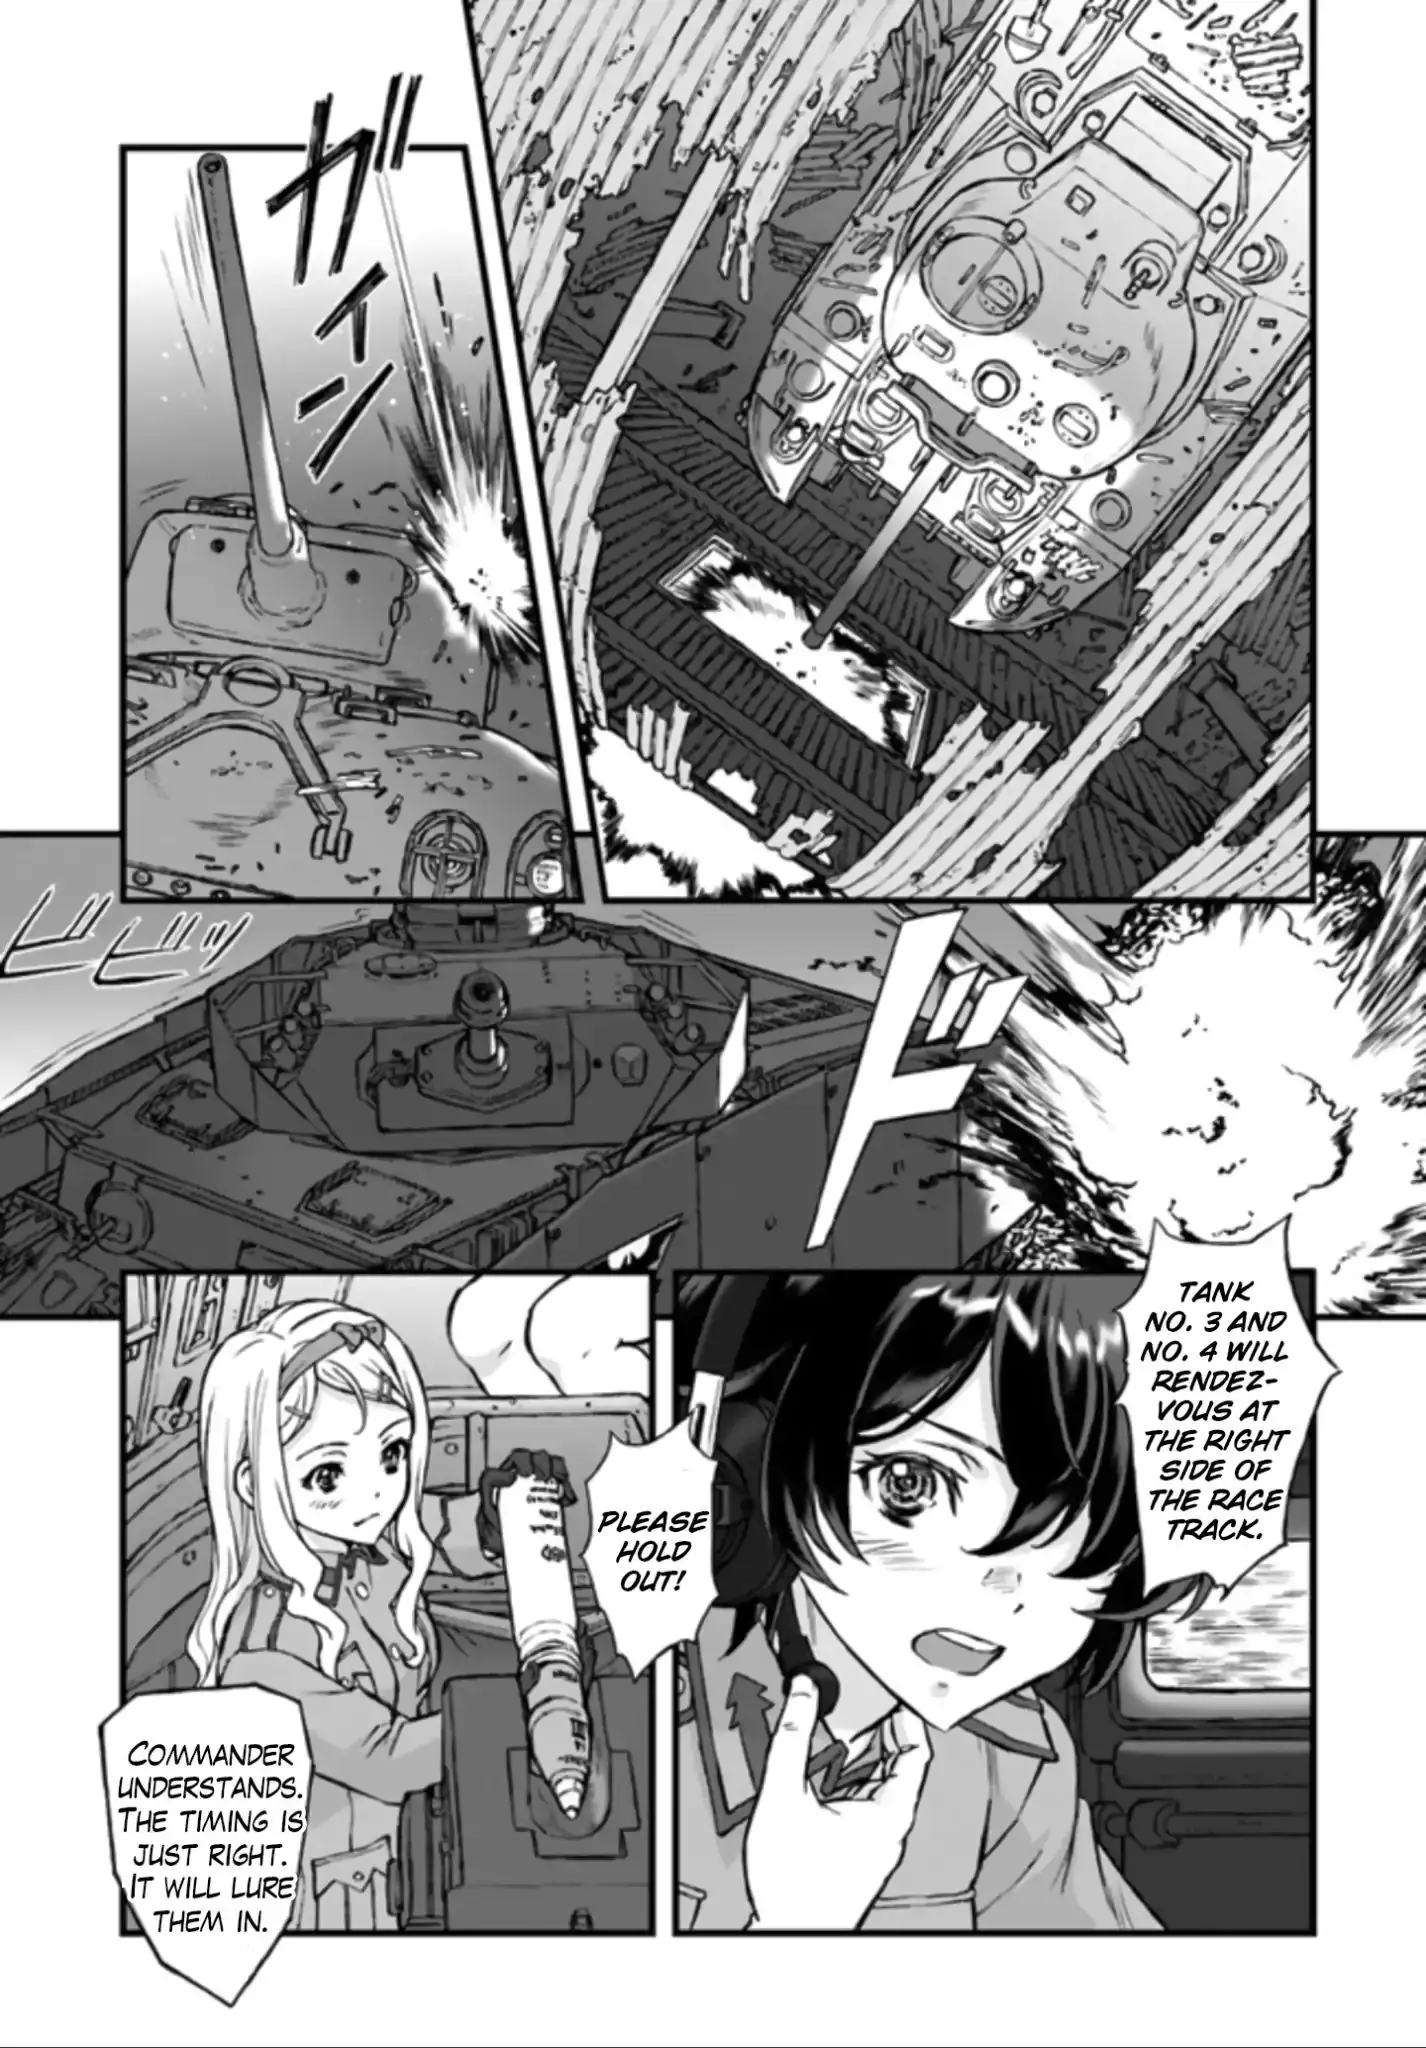 Girls Und Panzer - The Fir Tree And The Iron-Winged Witch - 2 page 3